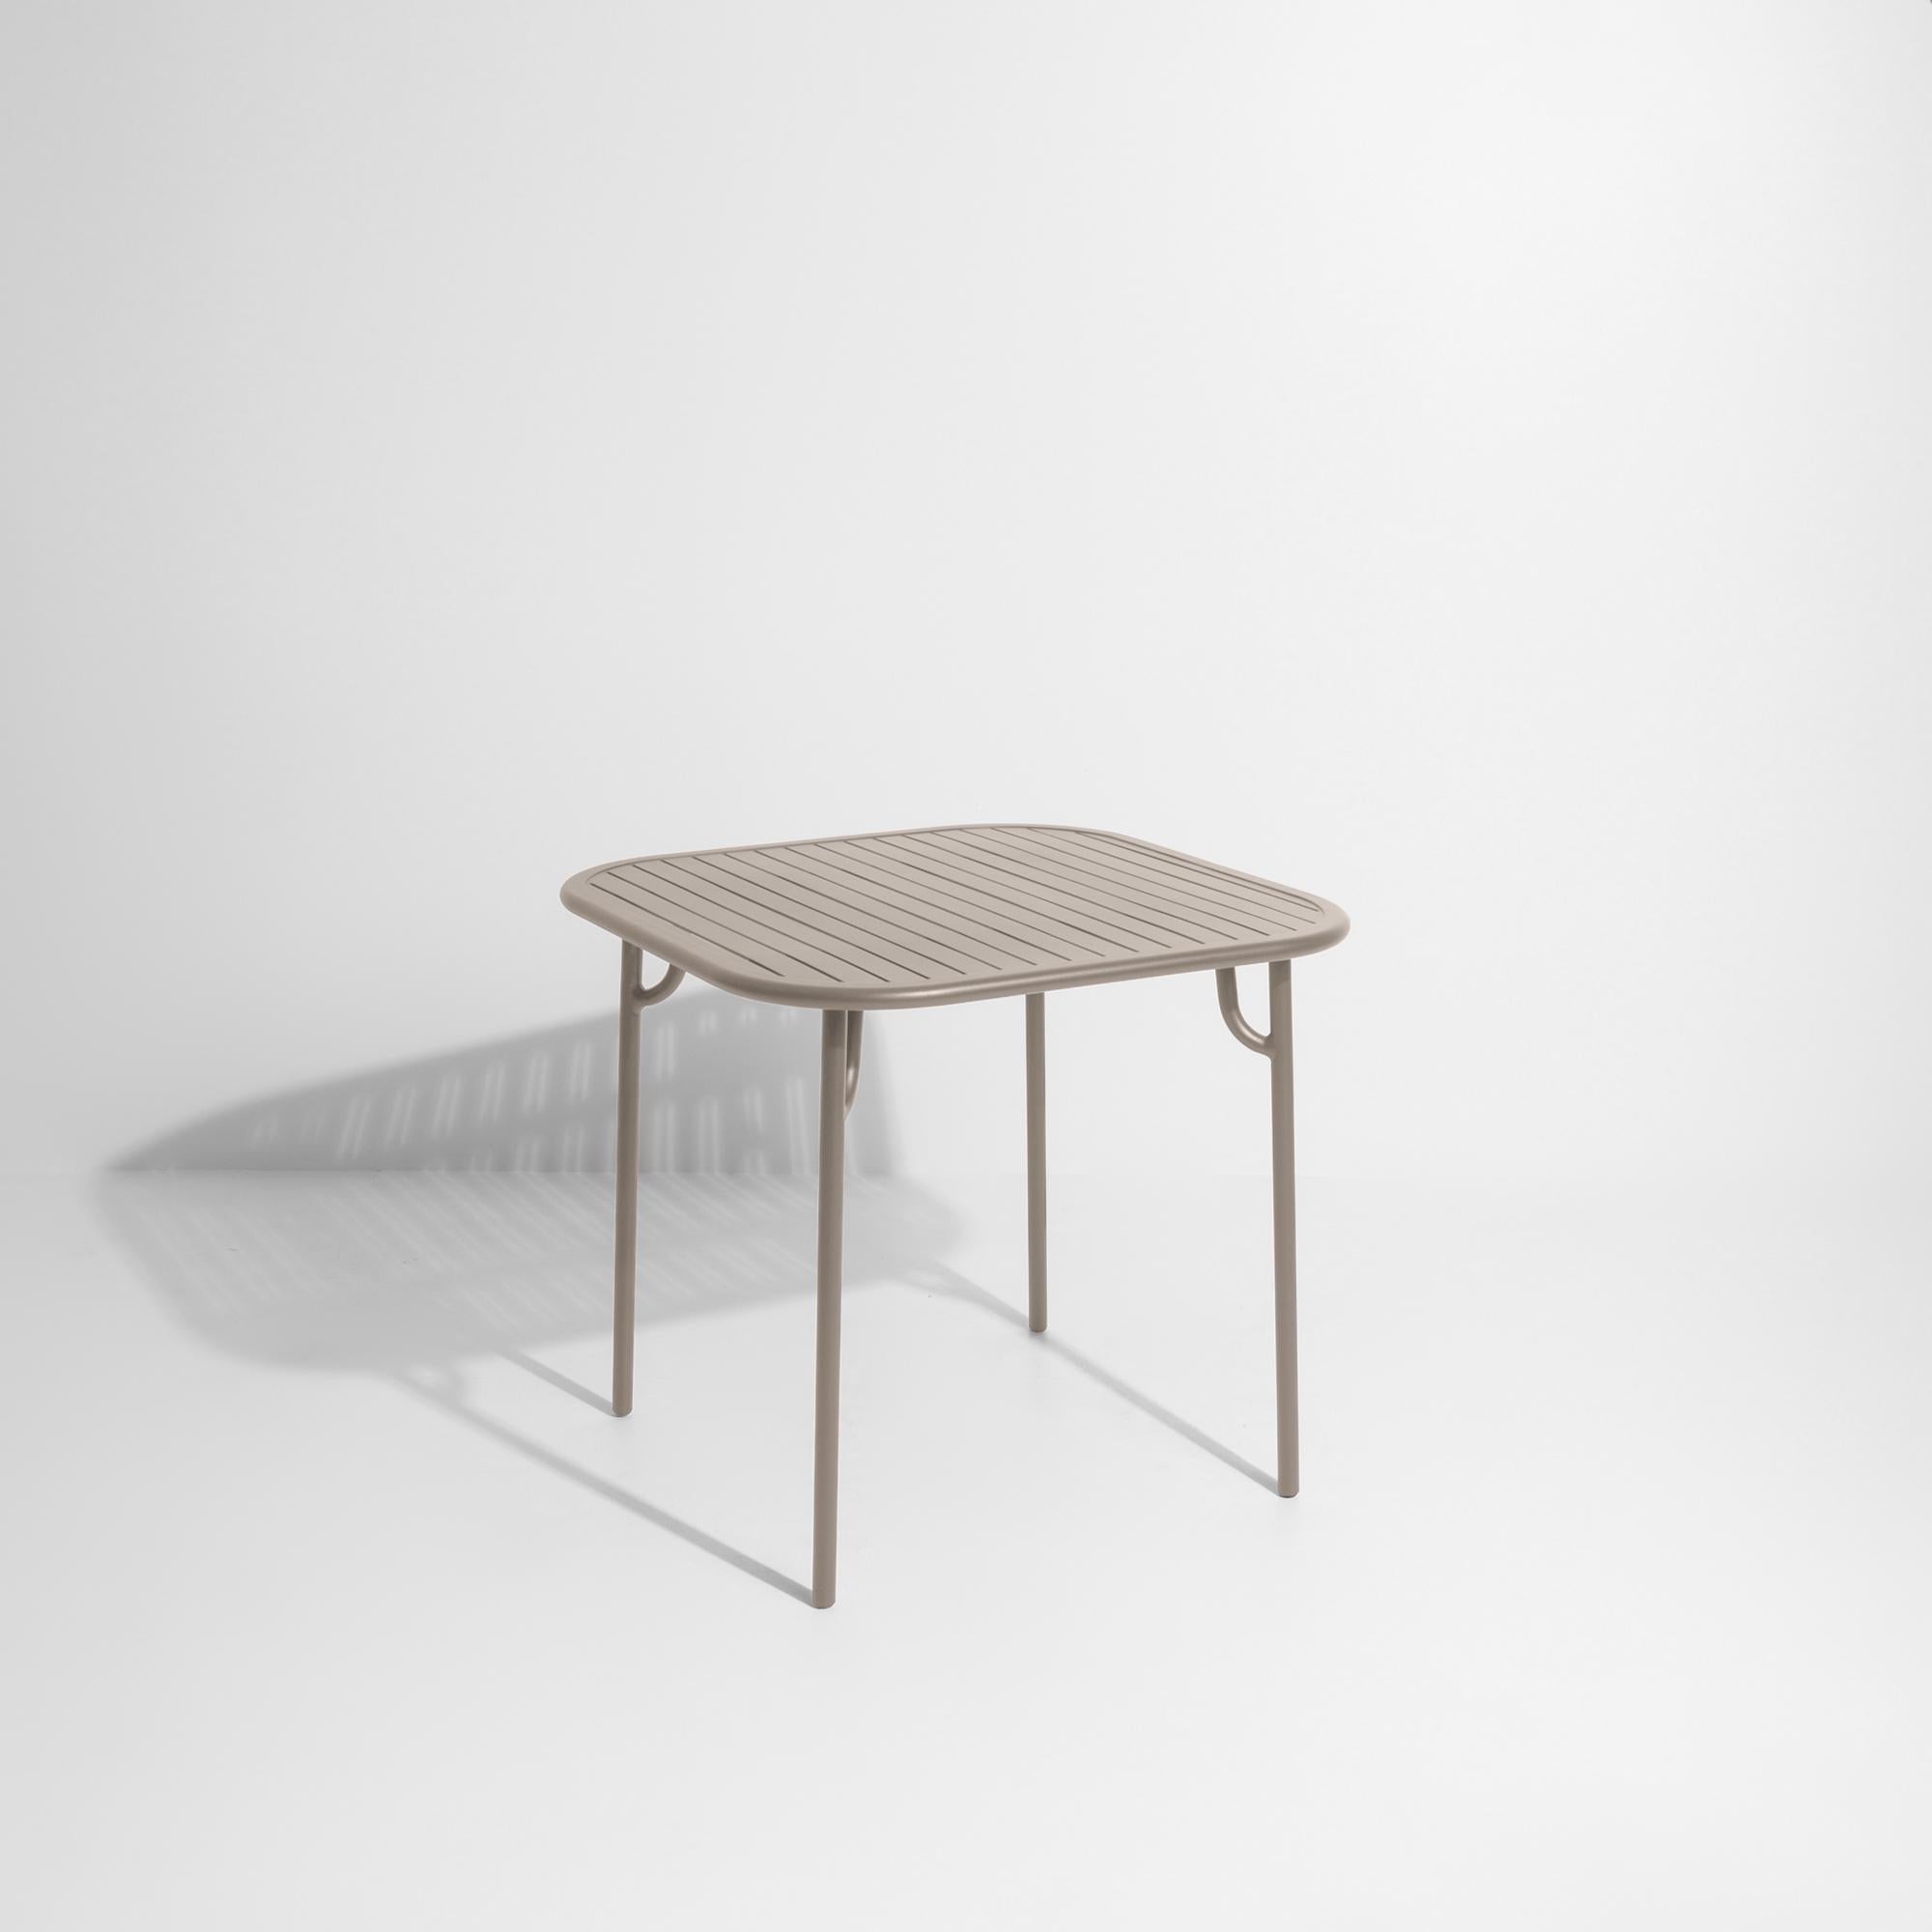 Petite Friture Week-End Square Dining Table in Dune Aluminium with Slats In New Condition For Sale In Brooklyn, NY